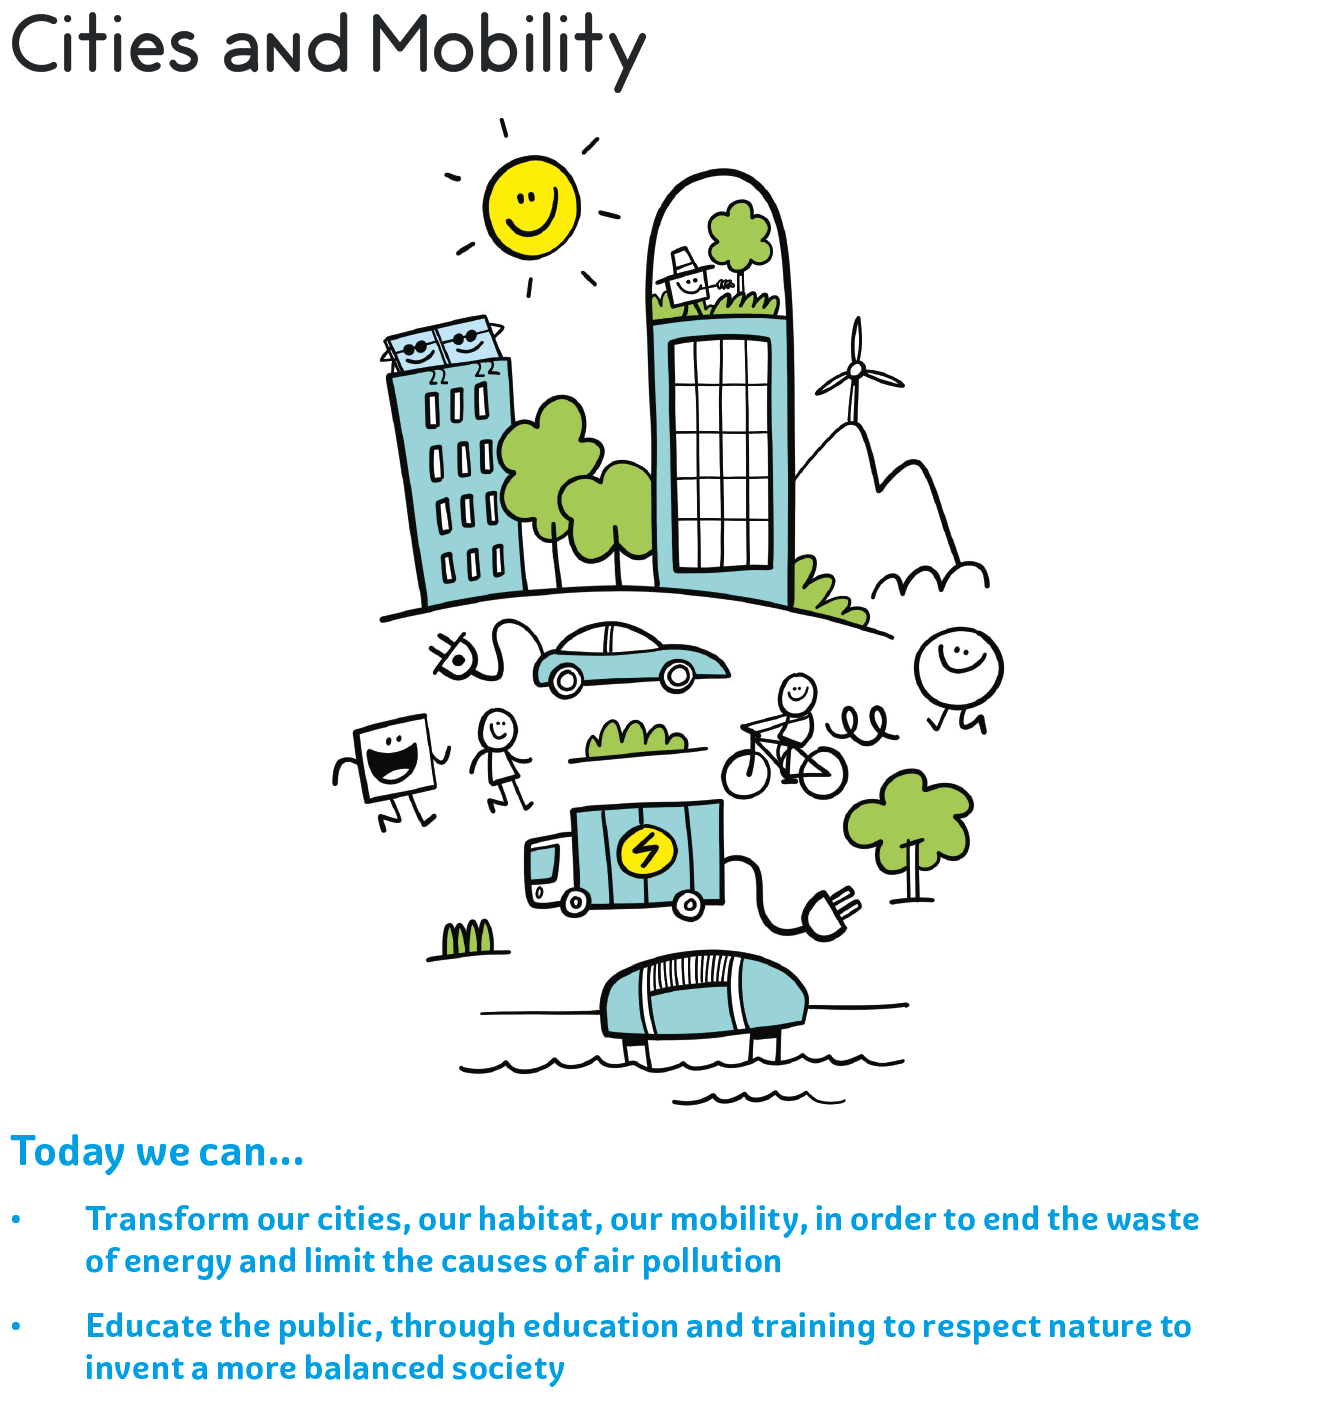 Cities and mobility